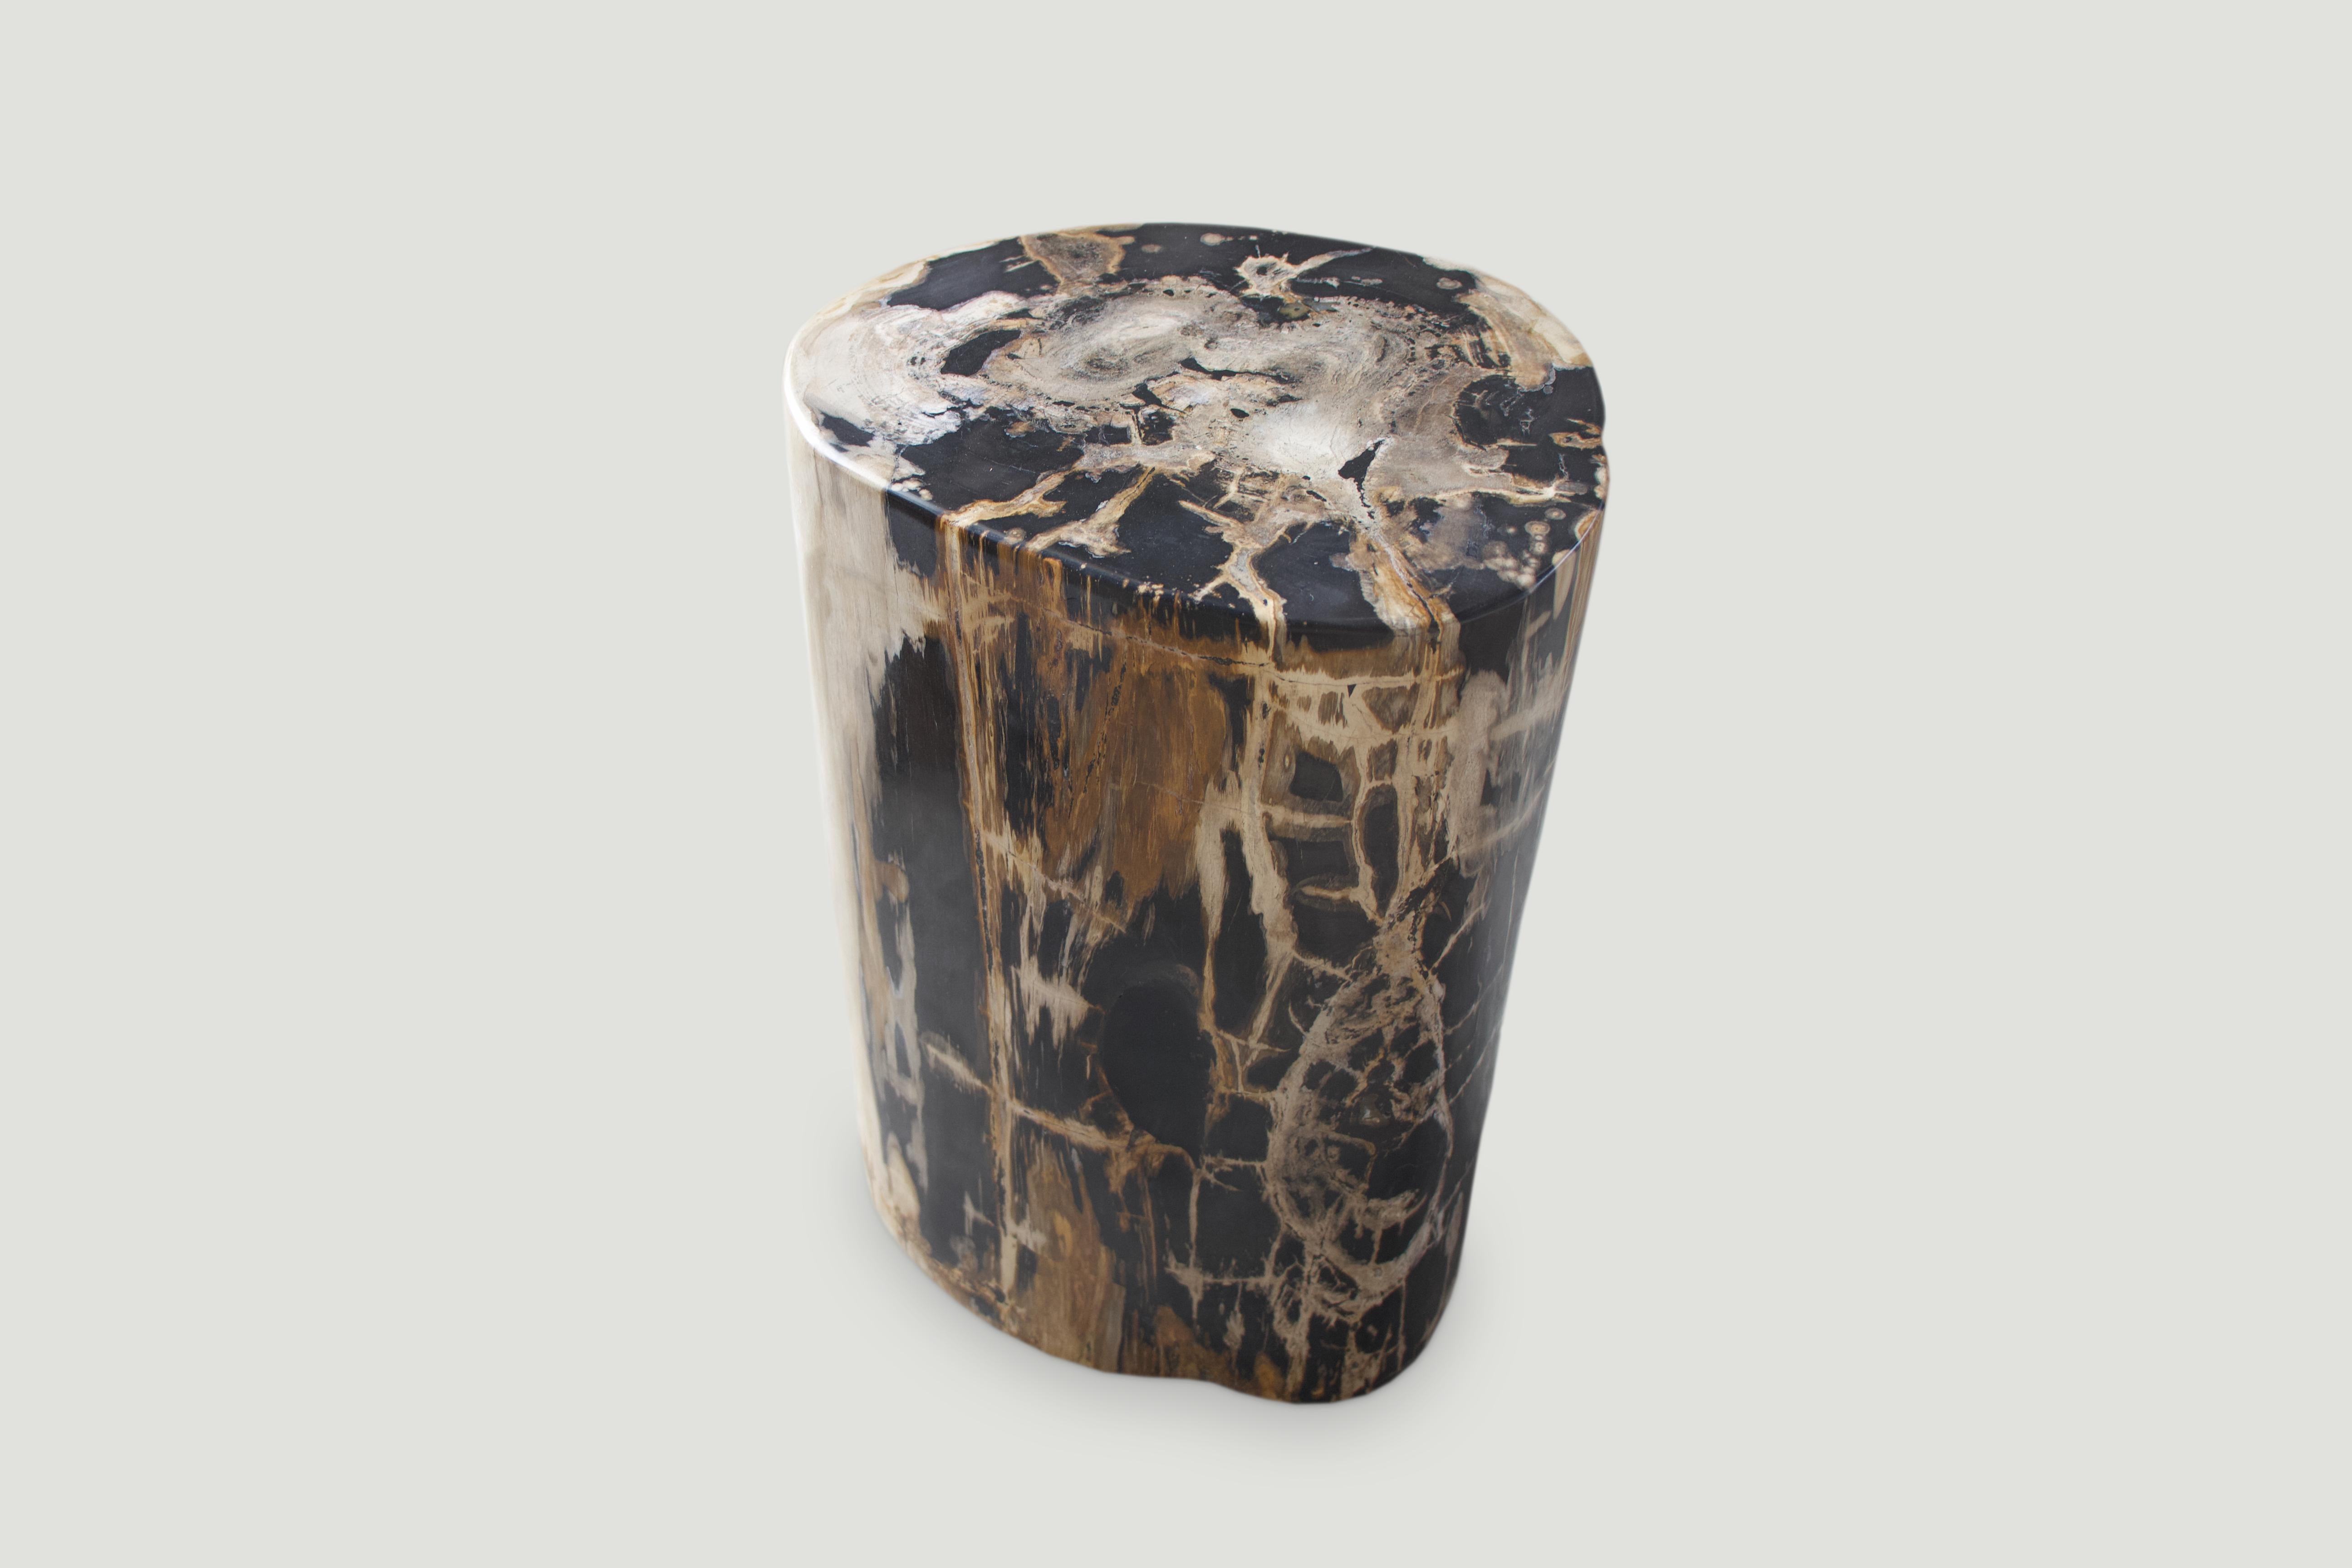 Beautiful natural markings on this super smooth petrified wood side table. It’s fascinating how Mother Nature produces these stunning 40 million year old petrified teak logs with such contrasting colors with natural patterns throughout. Modern yet